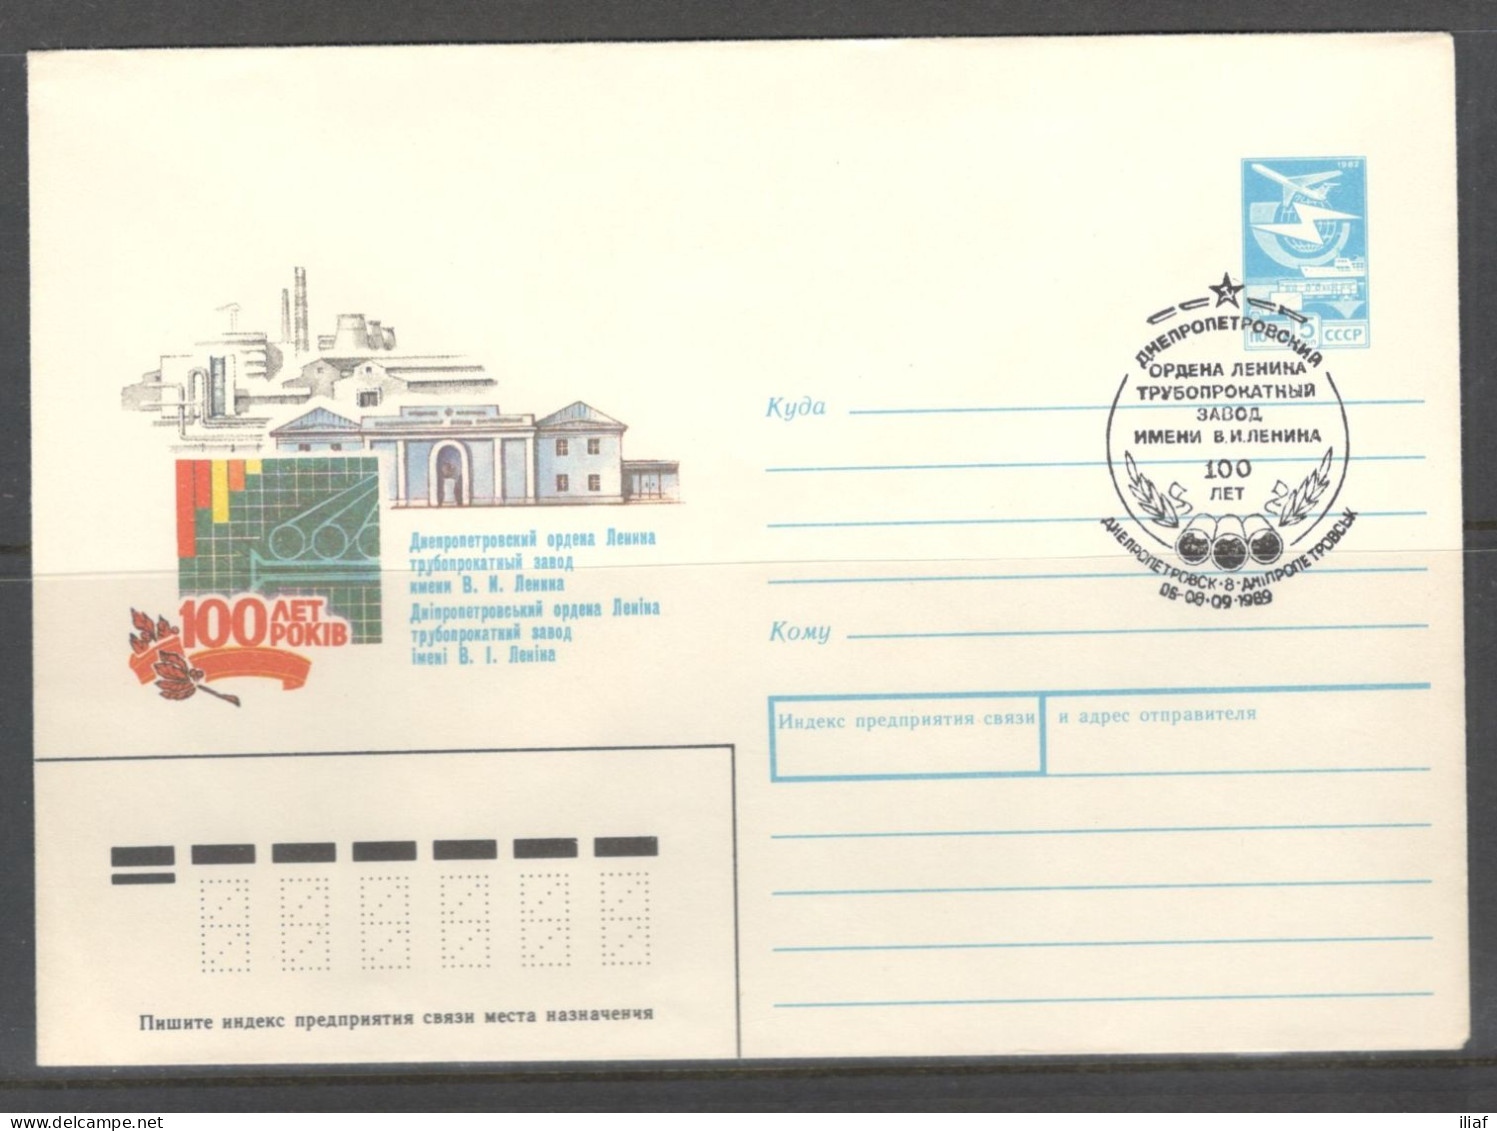 Ukraine & USSR. 100 Years Of The Dnepropetrovsk Pipe Rolling Plant.  Illustrated Envelope With Special Cancellation - Fabbriche E Imprese